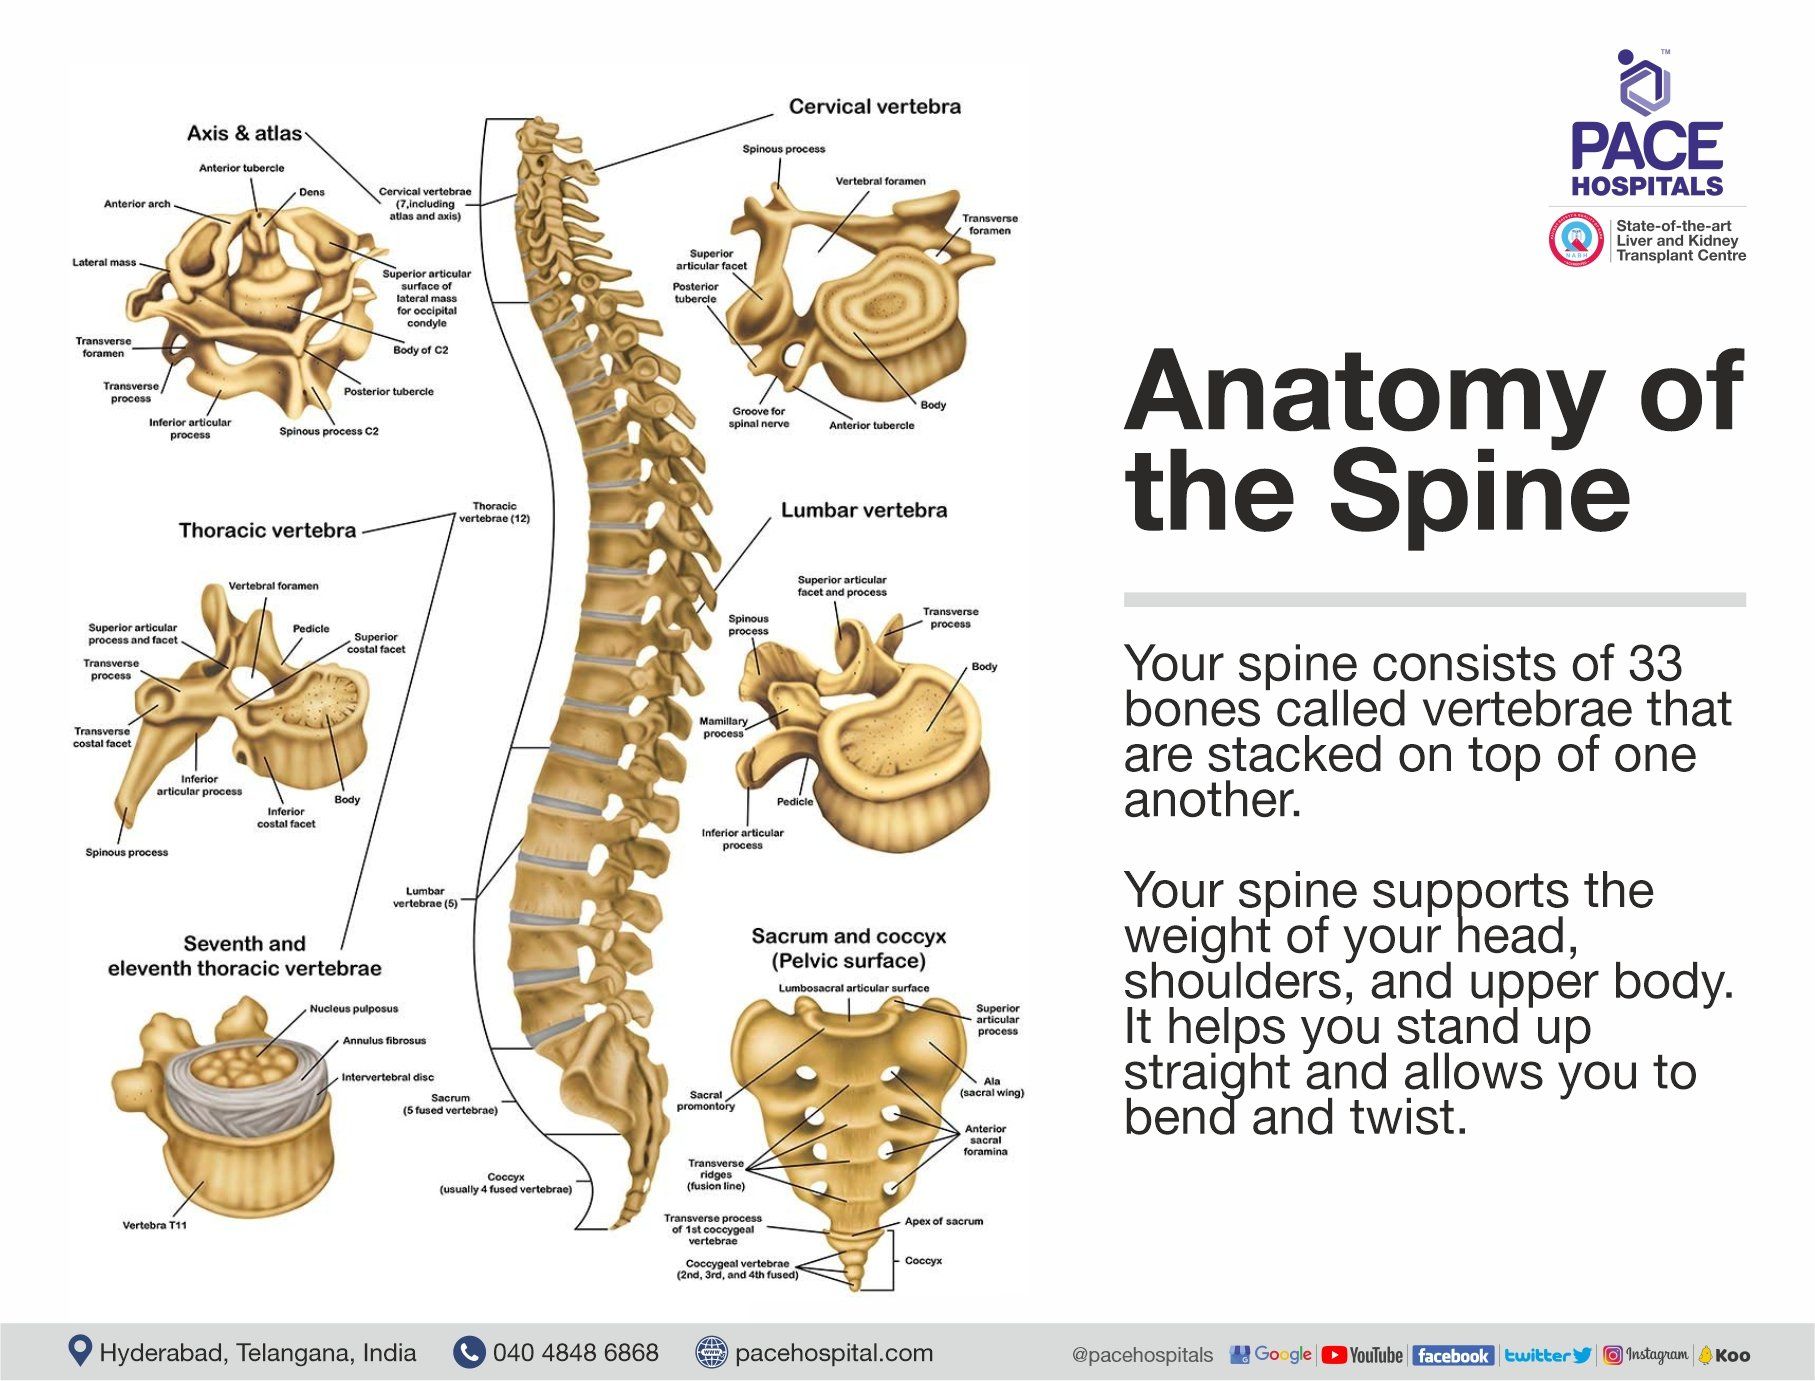 Anatomy of the spine and Its Functions | Pace Hospitals